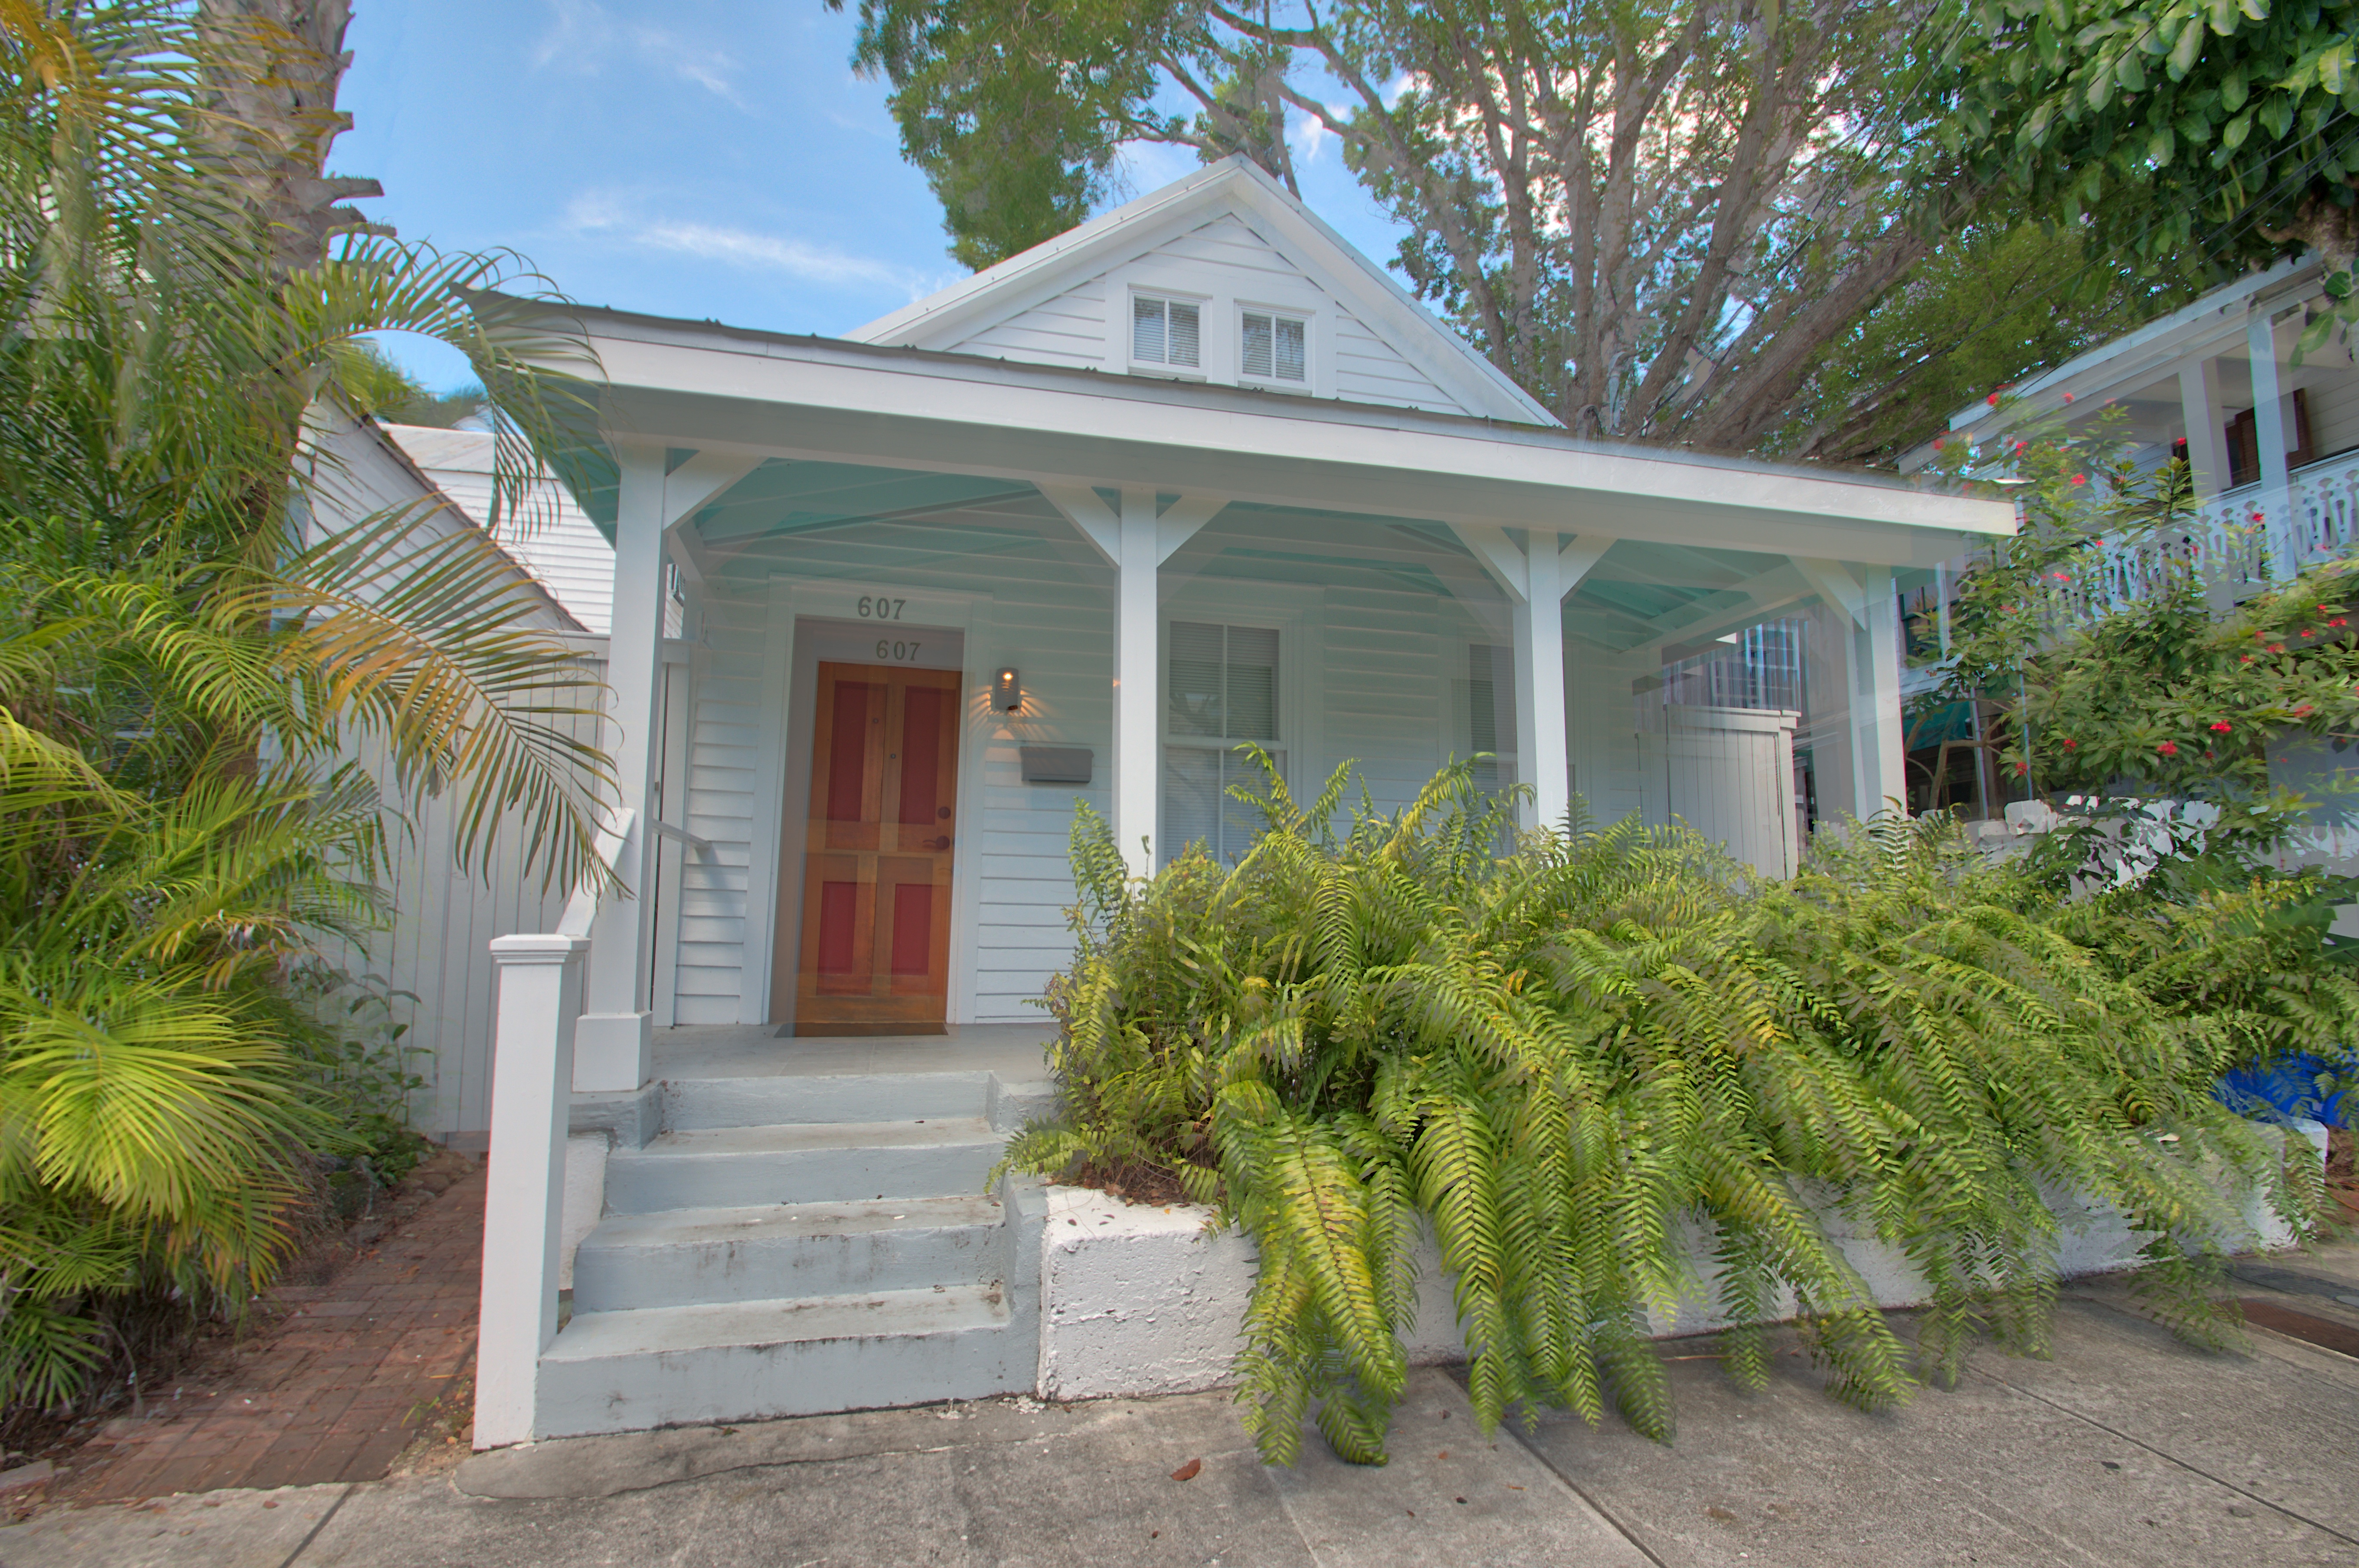 Cayo Hueso Cottage 20 Bedroom Vacation Accommodations in Key West ...